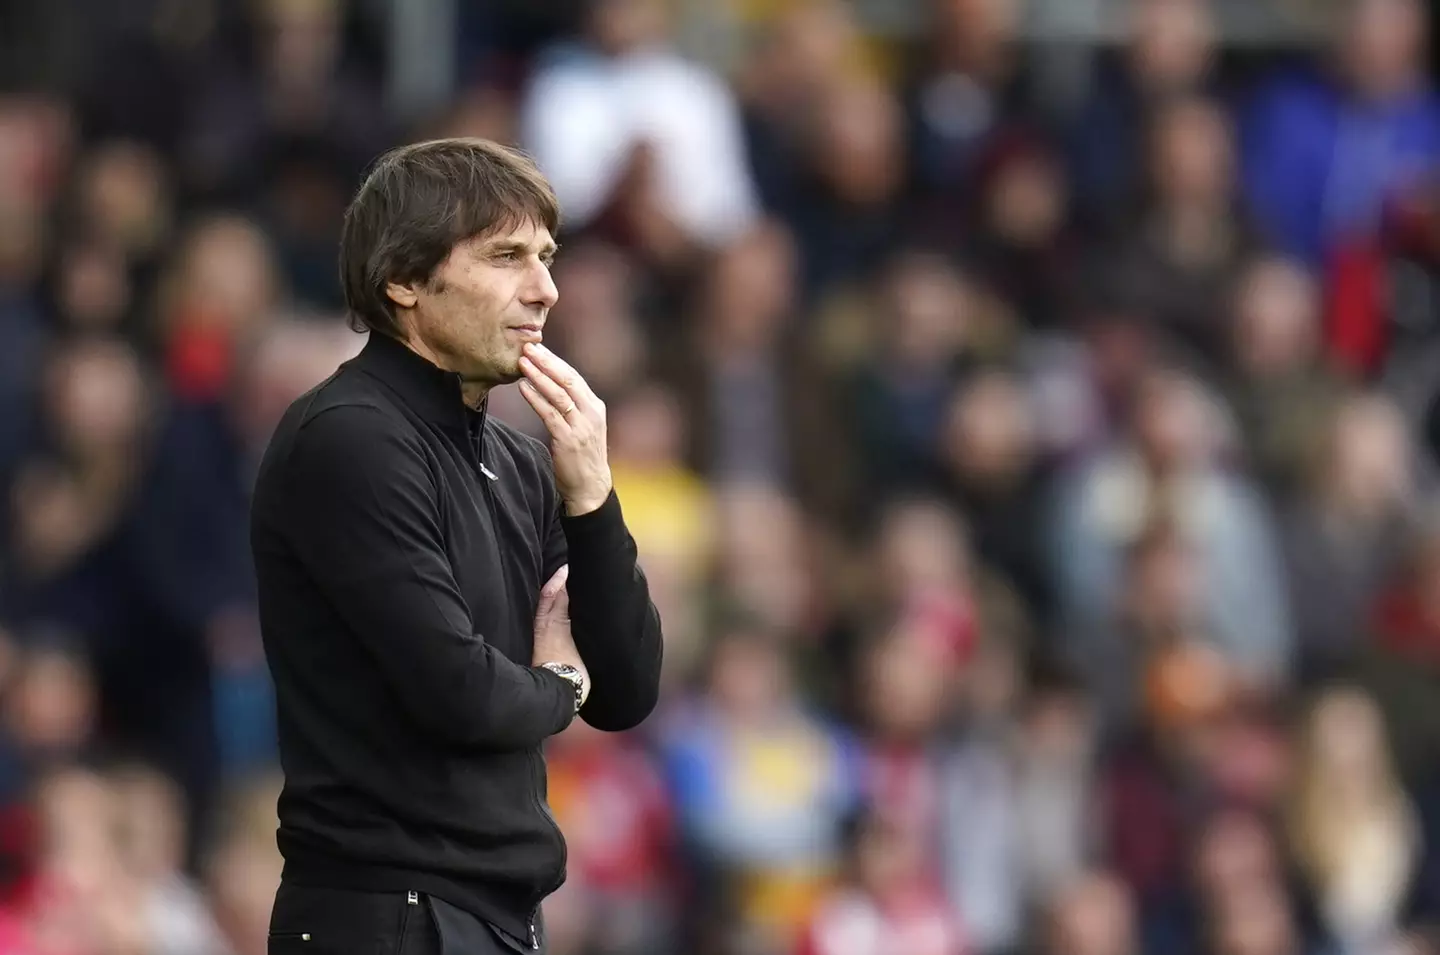 Conte tried drastic measures to help his side's form. Image: Alamy